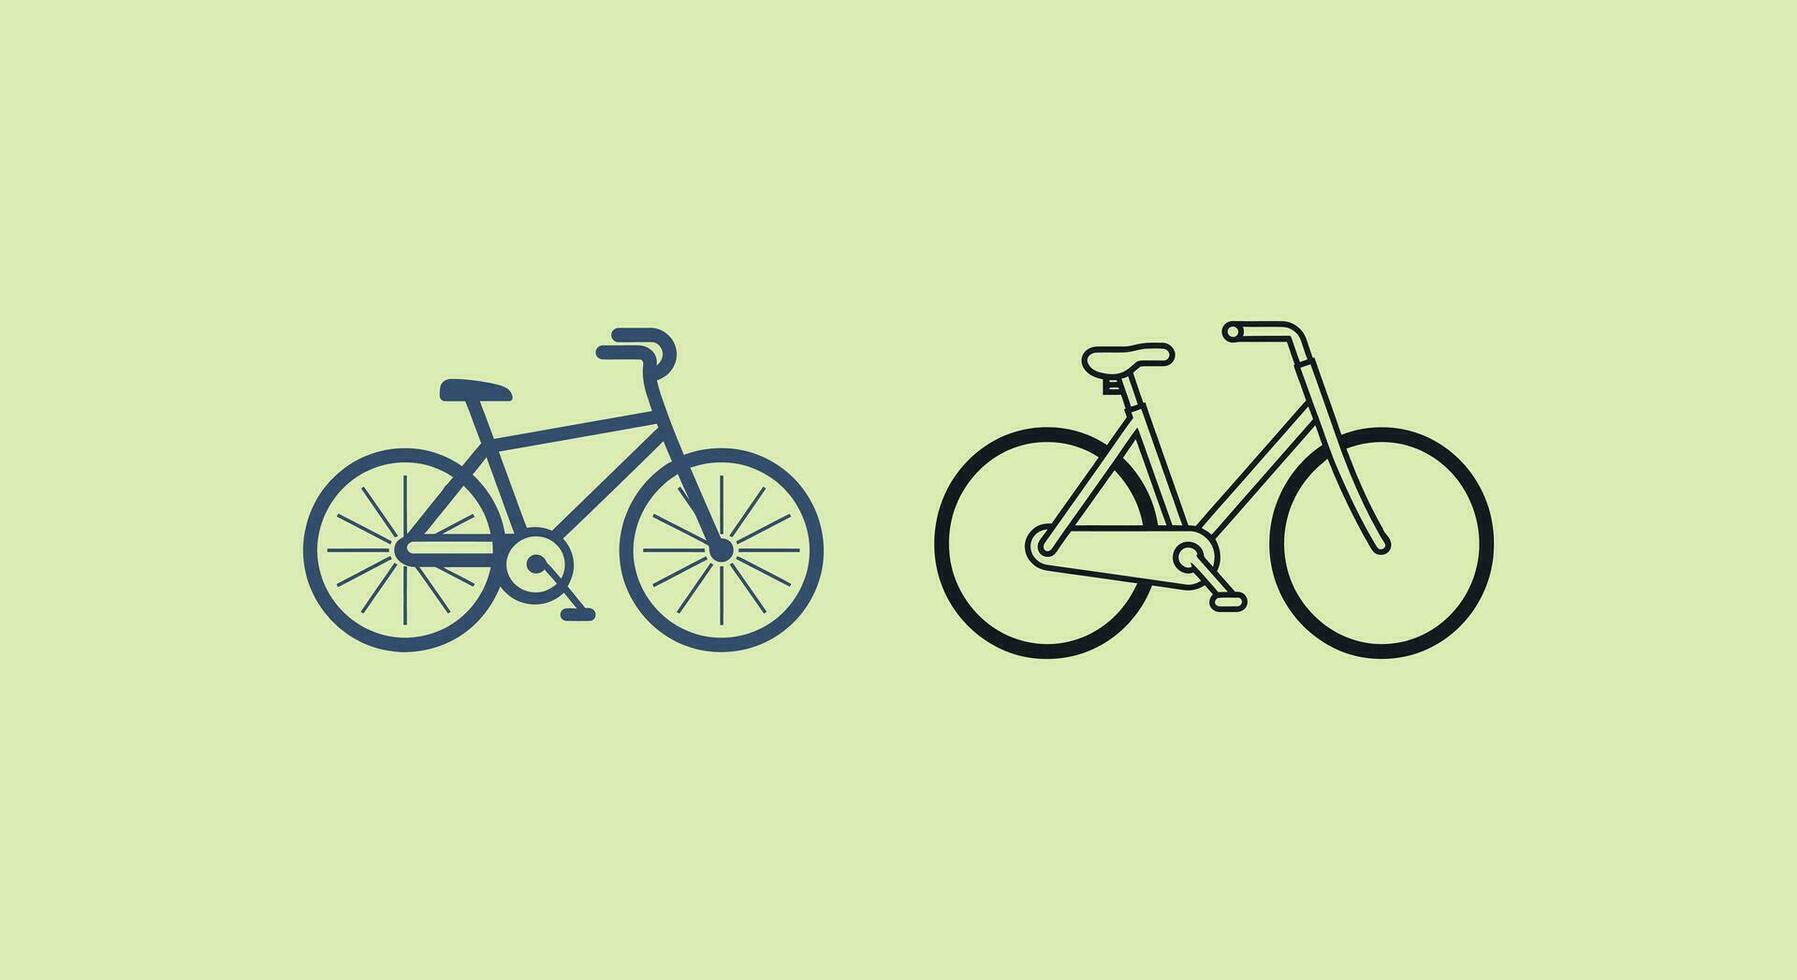 Two Wheels, Endless Adventures Bicycle Vector Collection for Active Living.